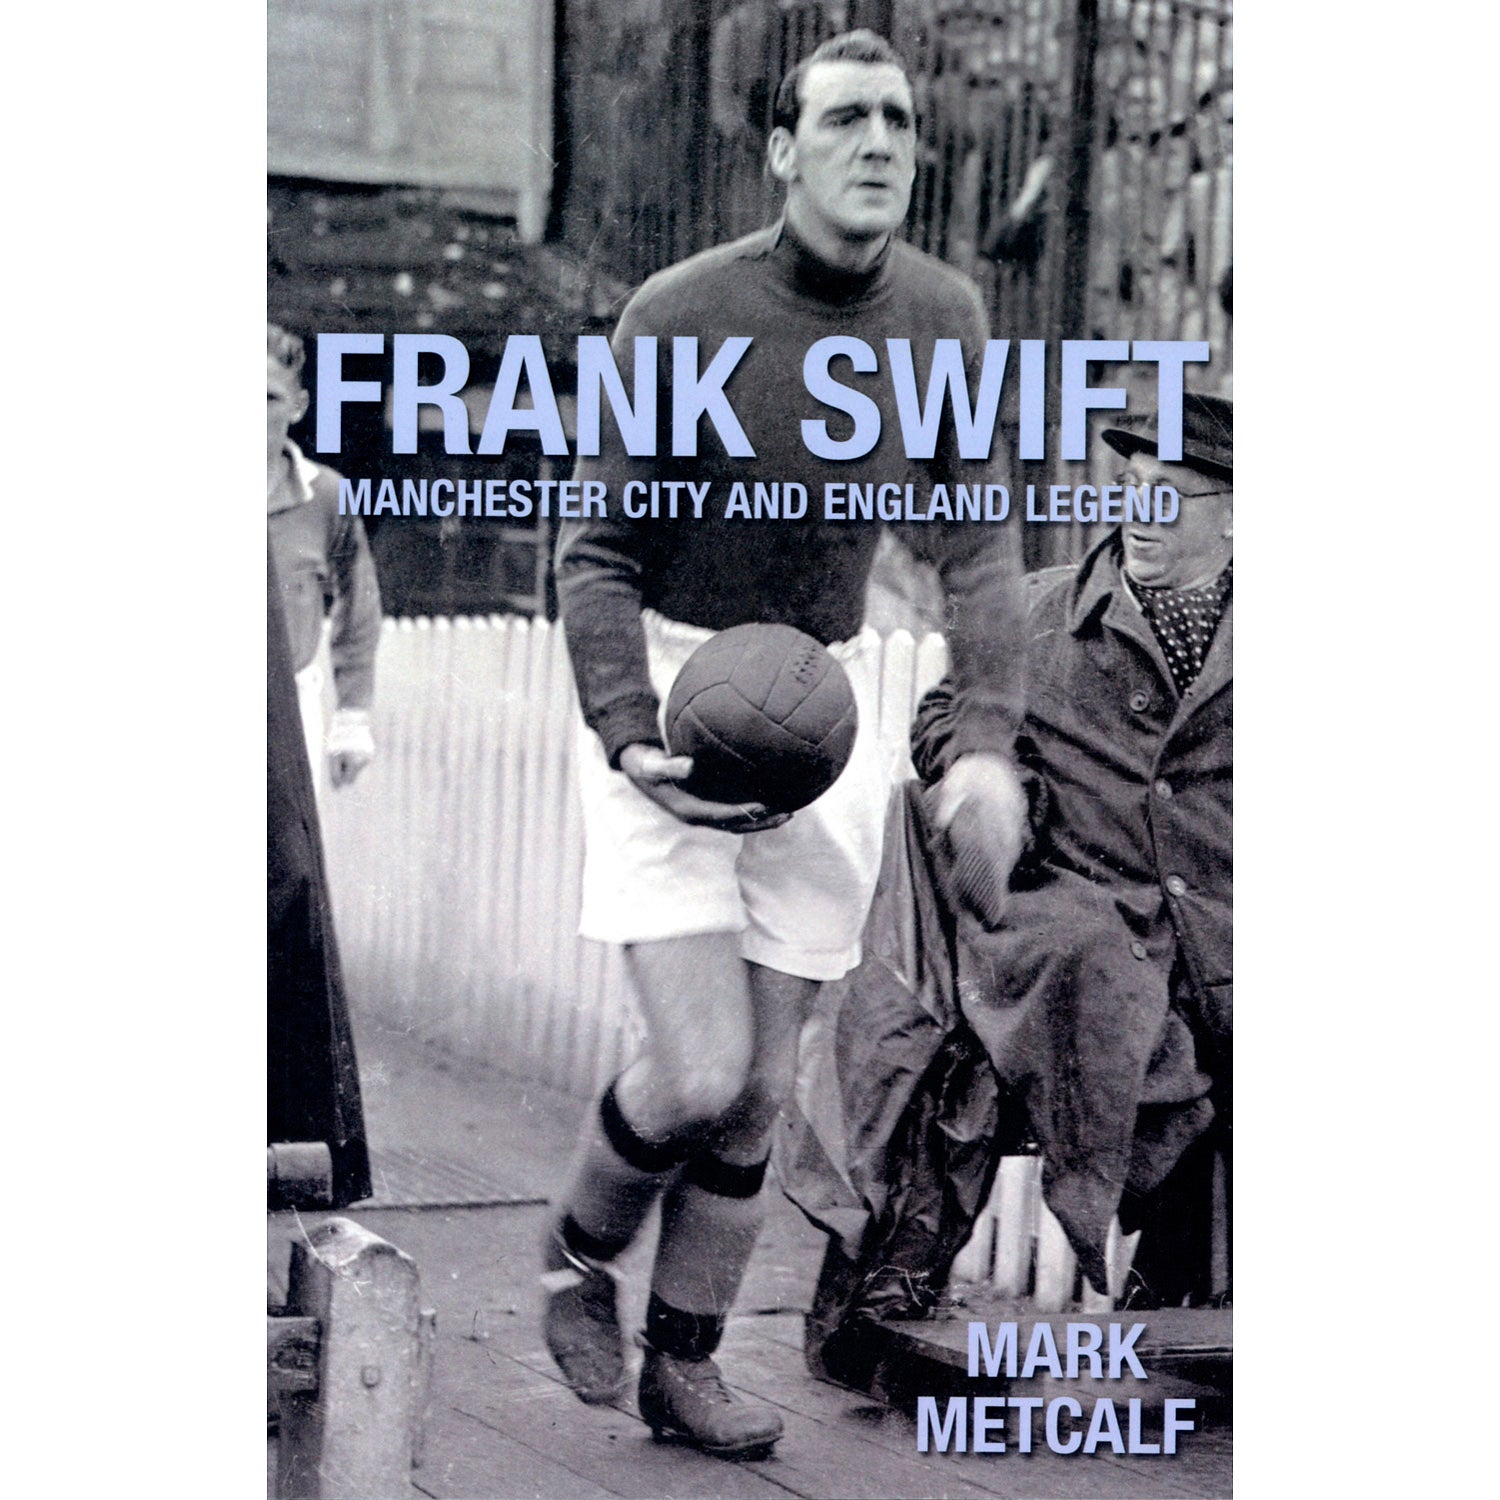 Frank Swift – Manchester City and England Legend